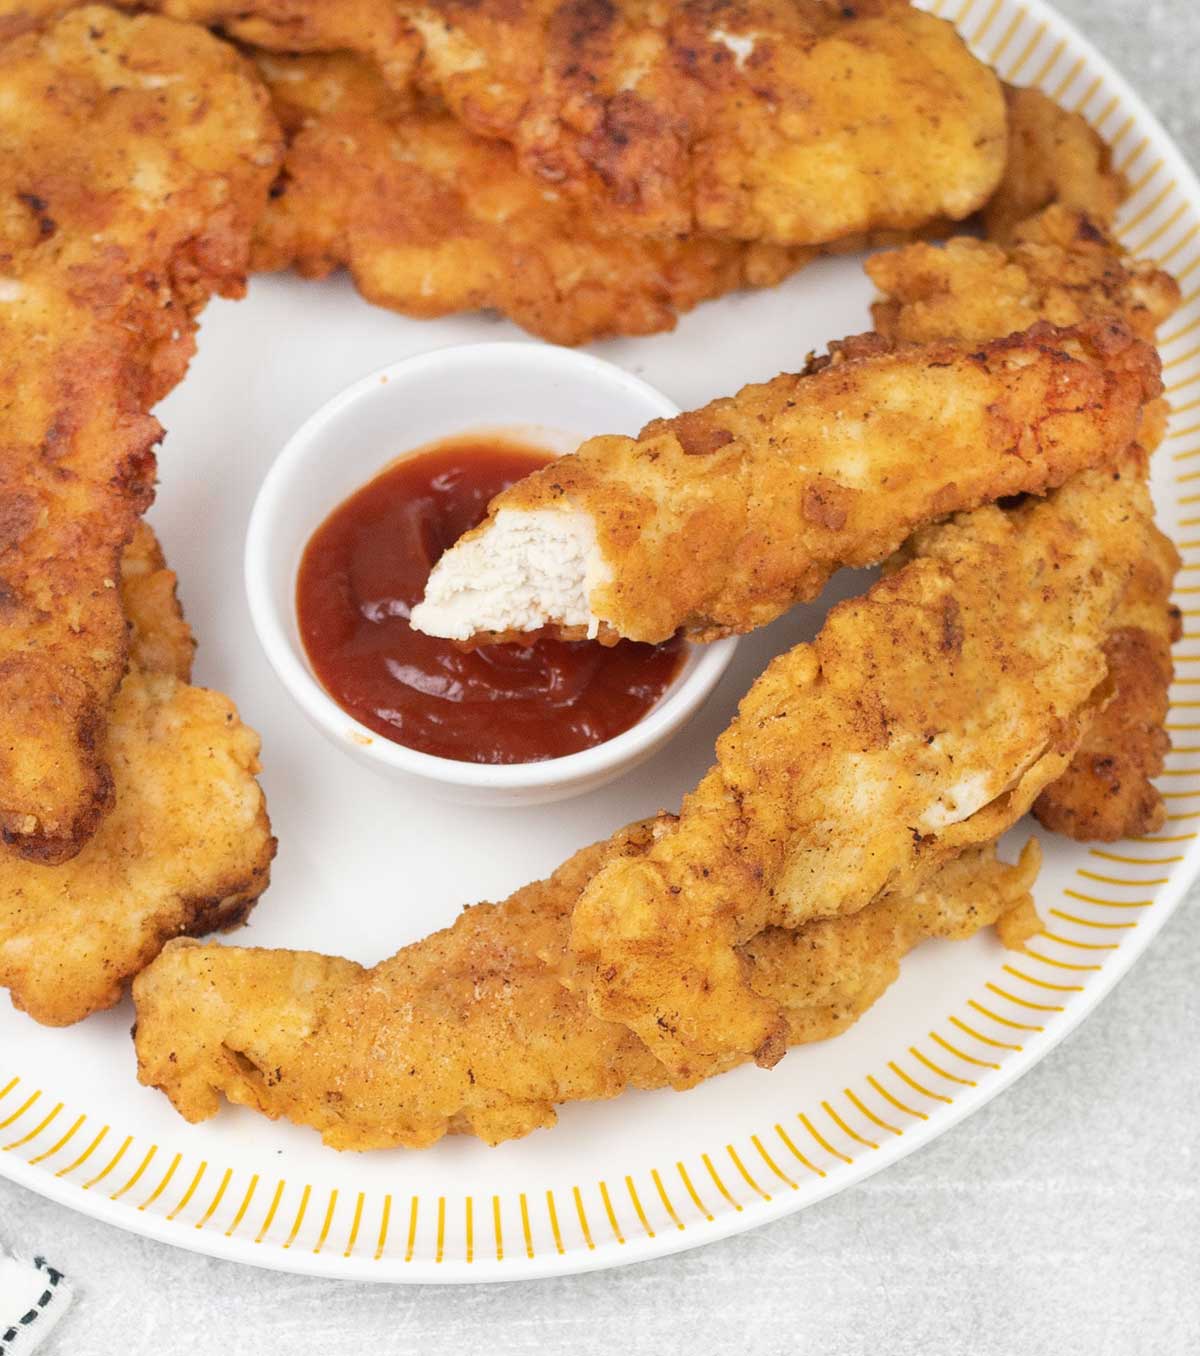 Eat one of the fried chicken tenders.